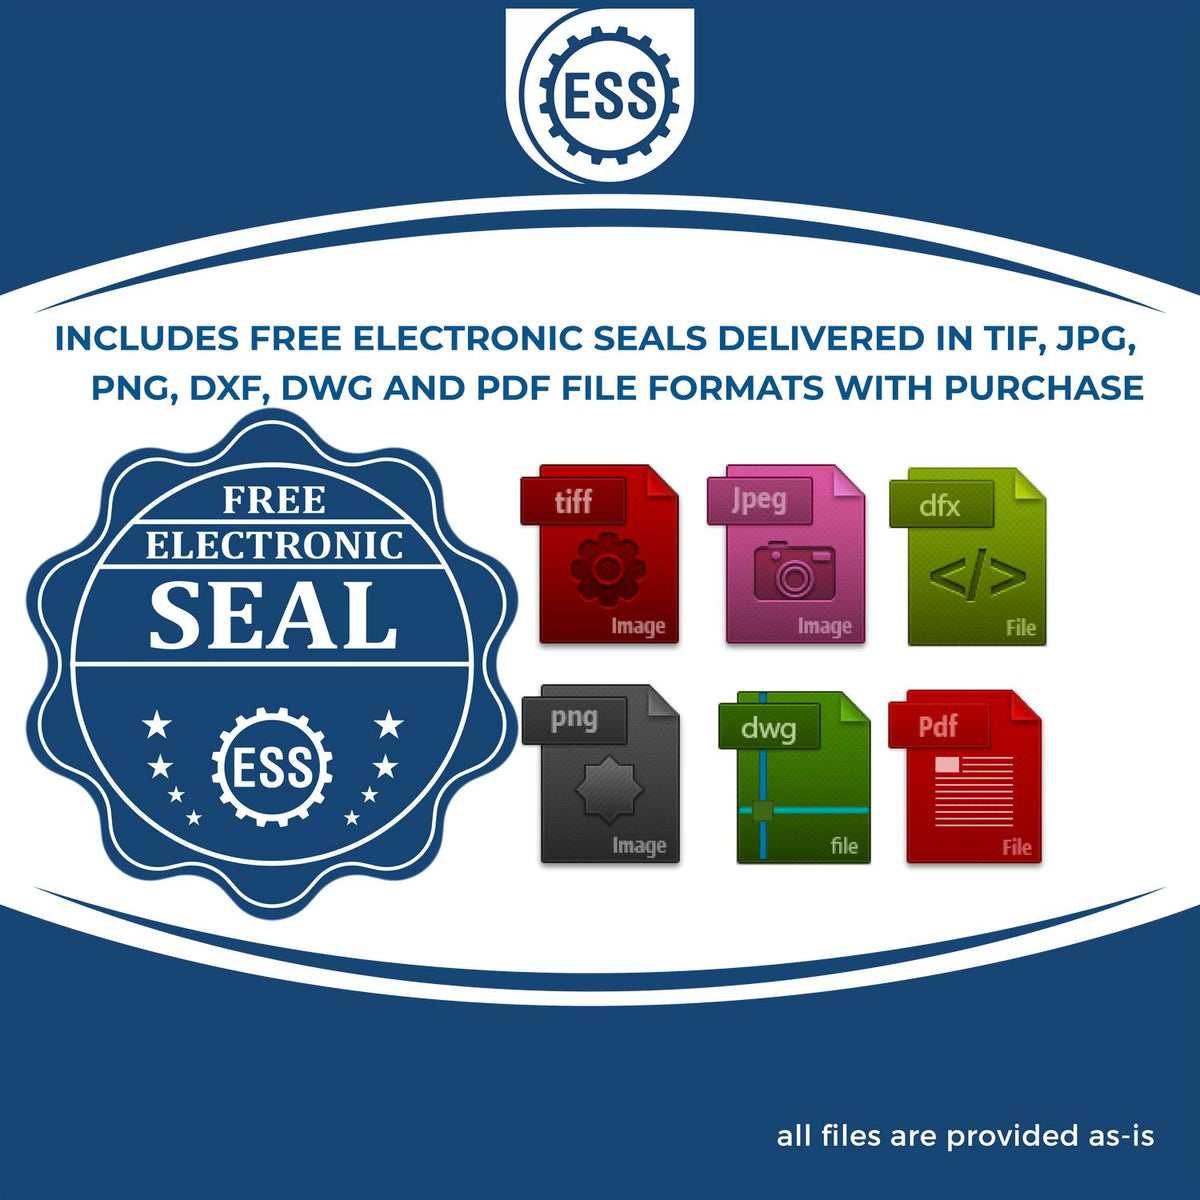 An infographic for the free electronic seal for the Slim Pre-Inked South Carolina Land Surveyor Seal Stamp illustrating the different file type icons such as DXF, DWG, TIF, JPG and PNG.